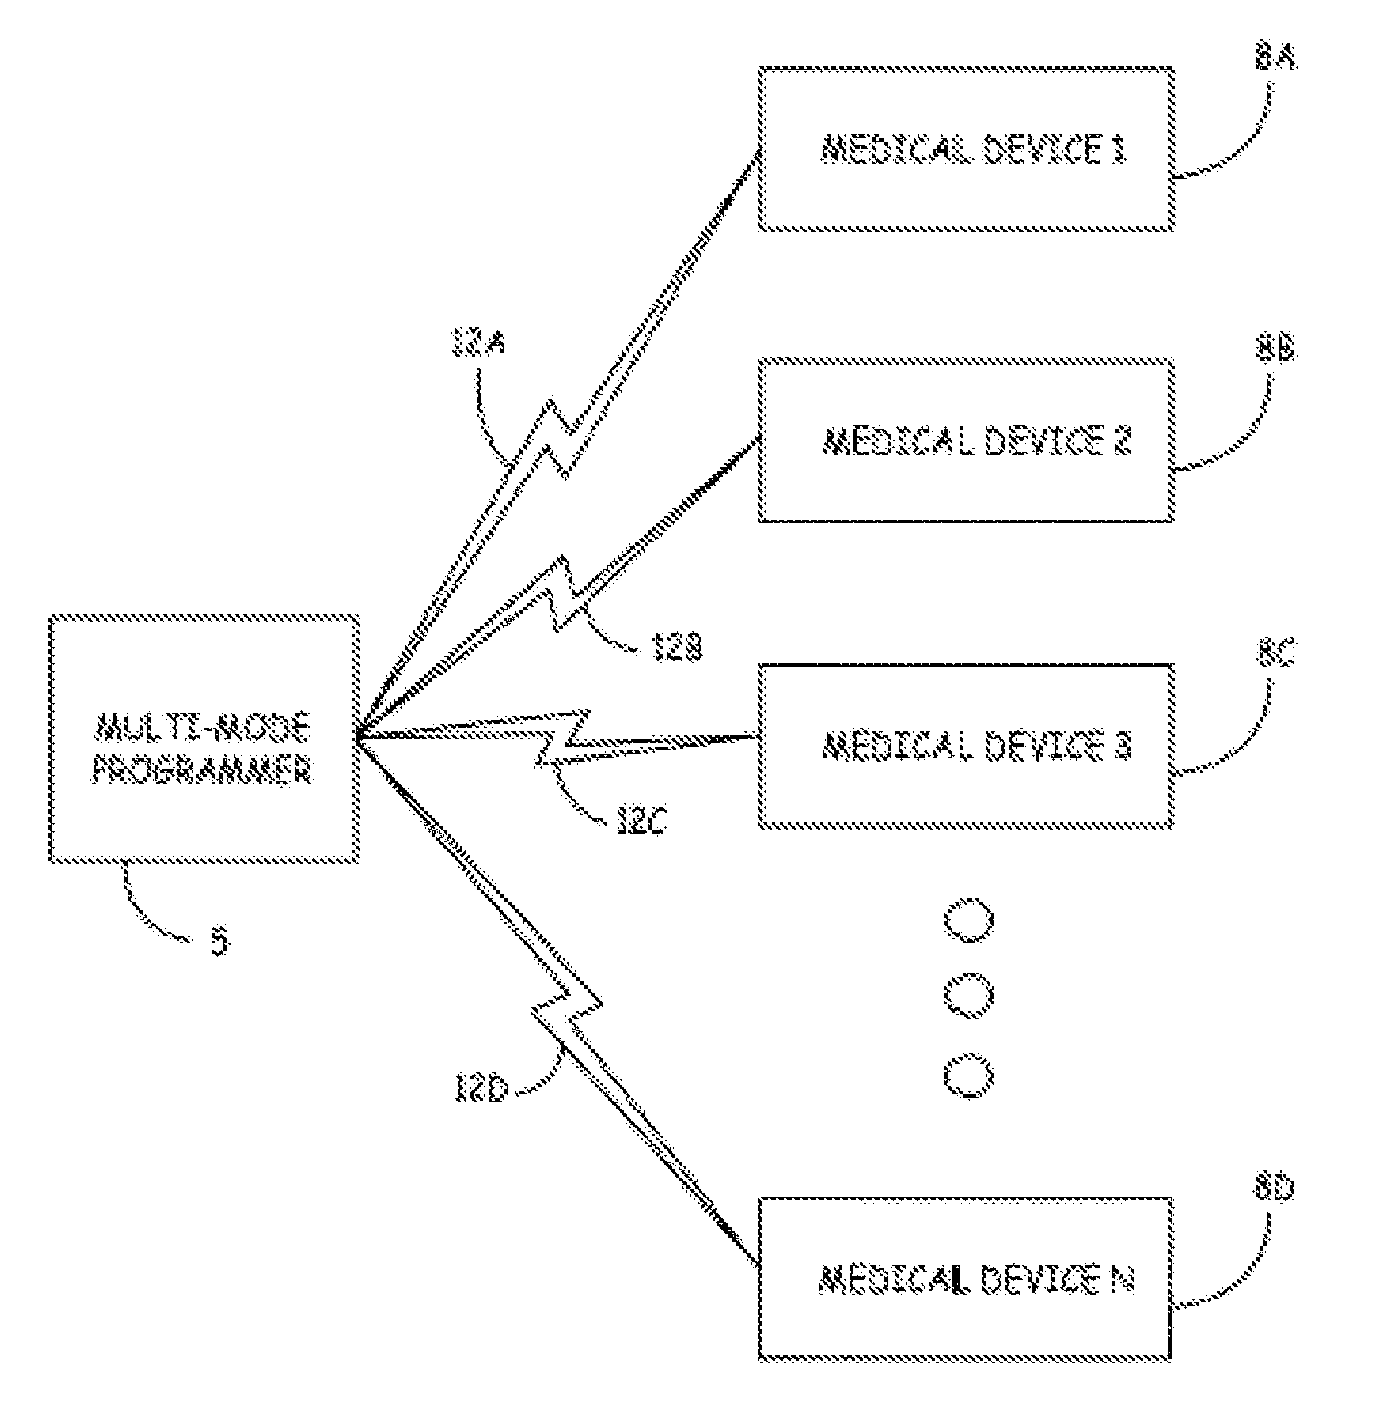 Multi-mode coordinator for medical device function